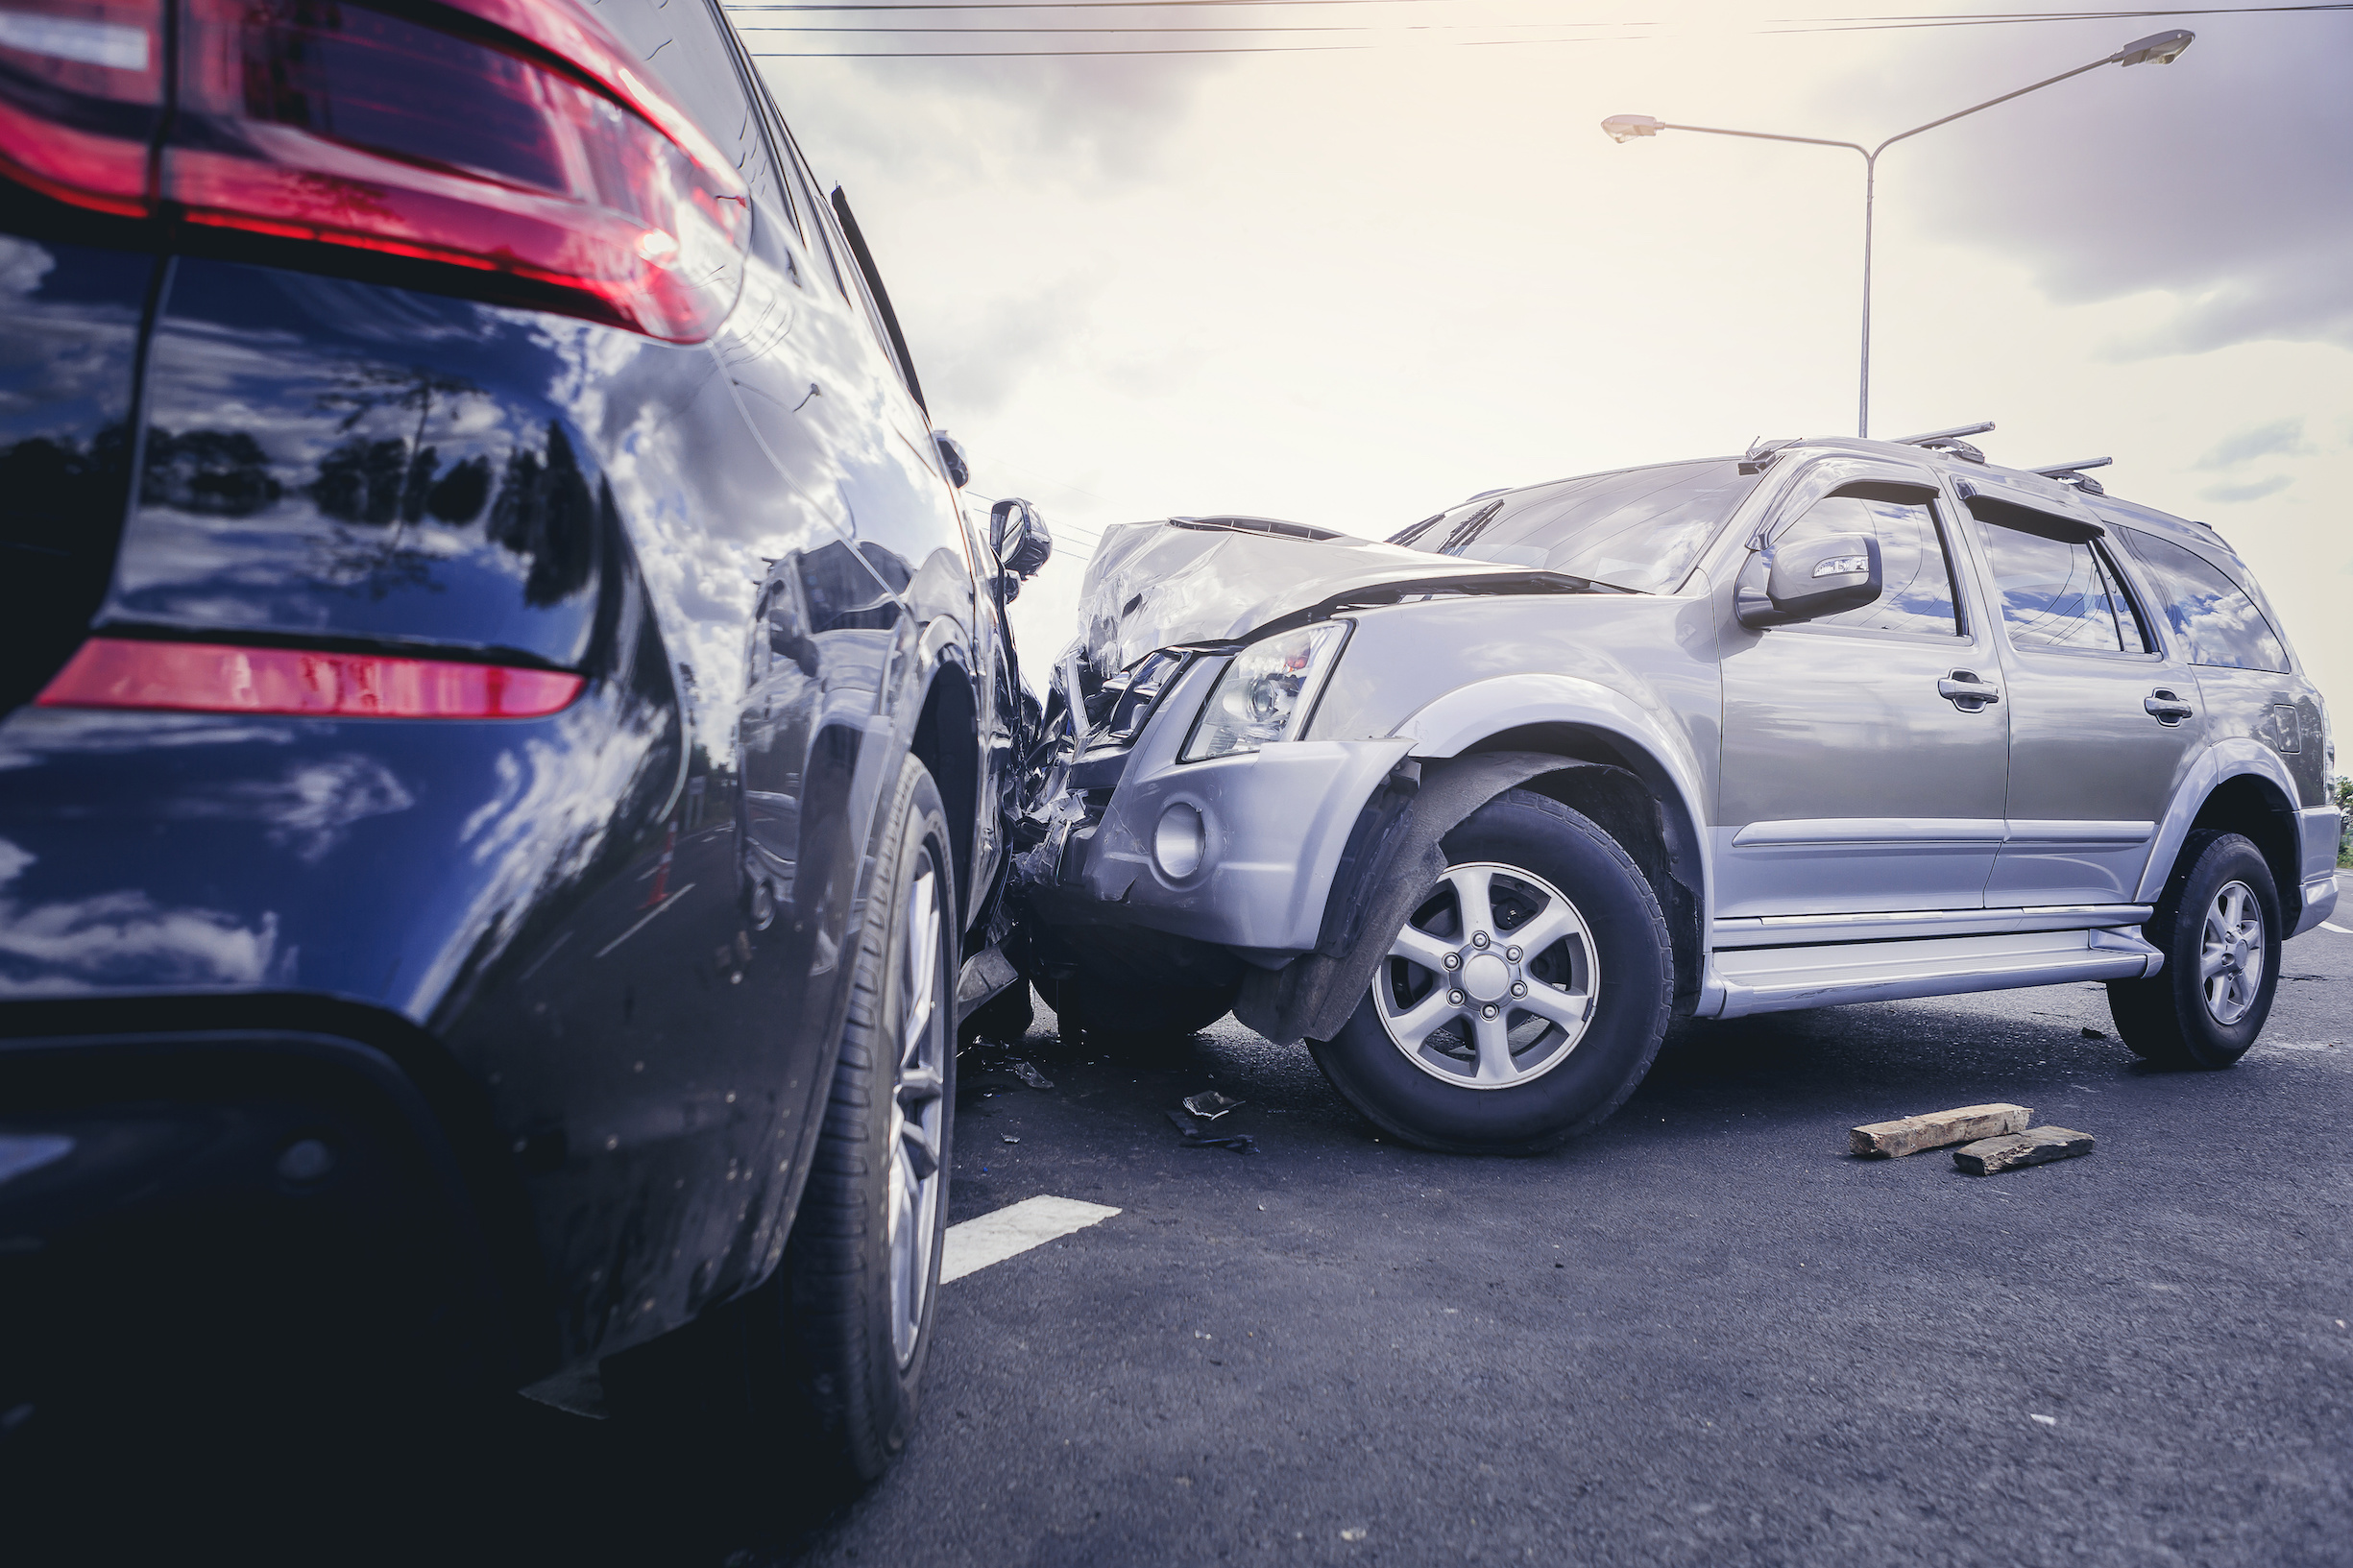 Should You Hire a Lawyer for Non-Fault Car Accidents?